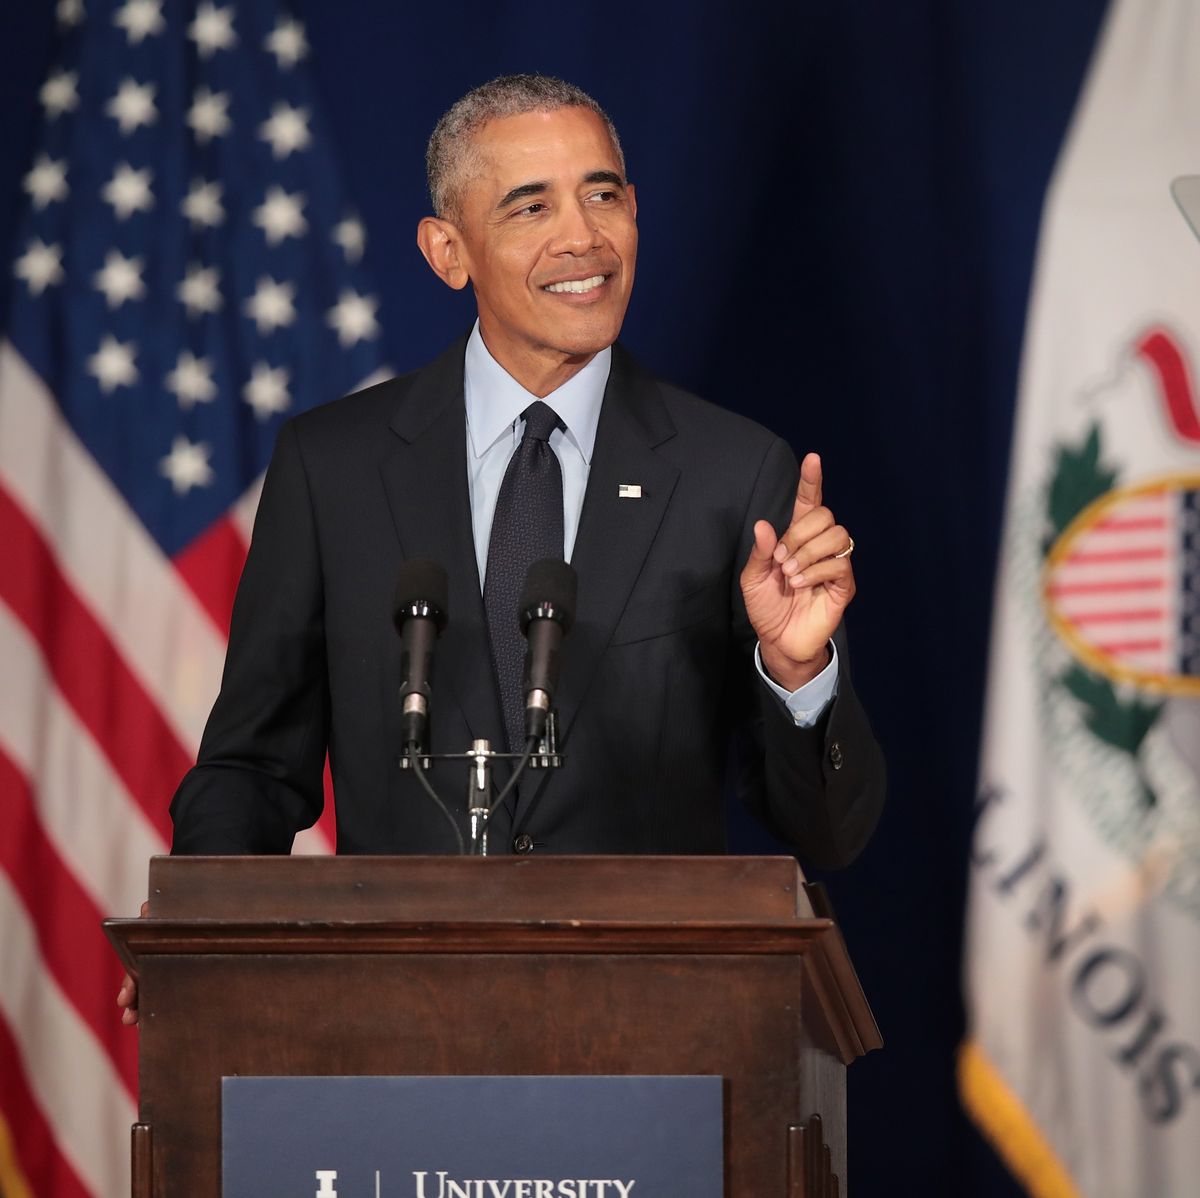 former president obama accepts the paul h douglas award for ethics in government at the university of illinois